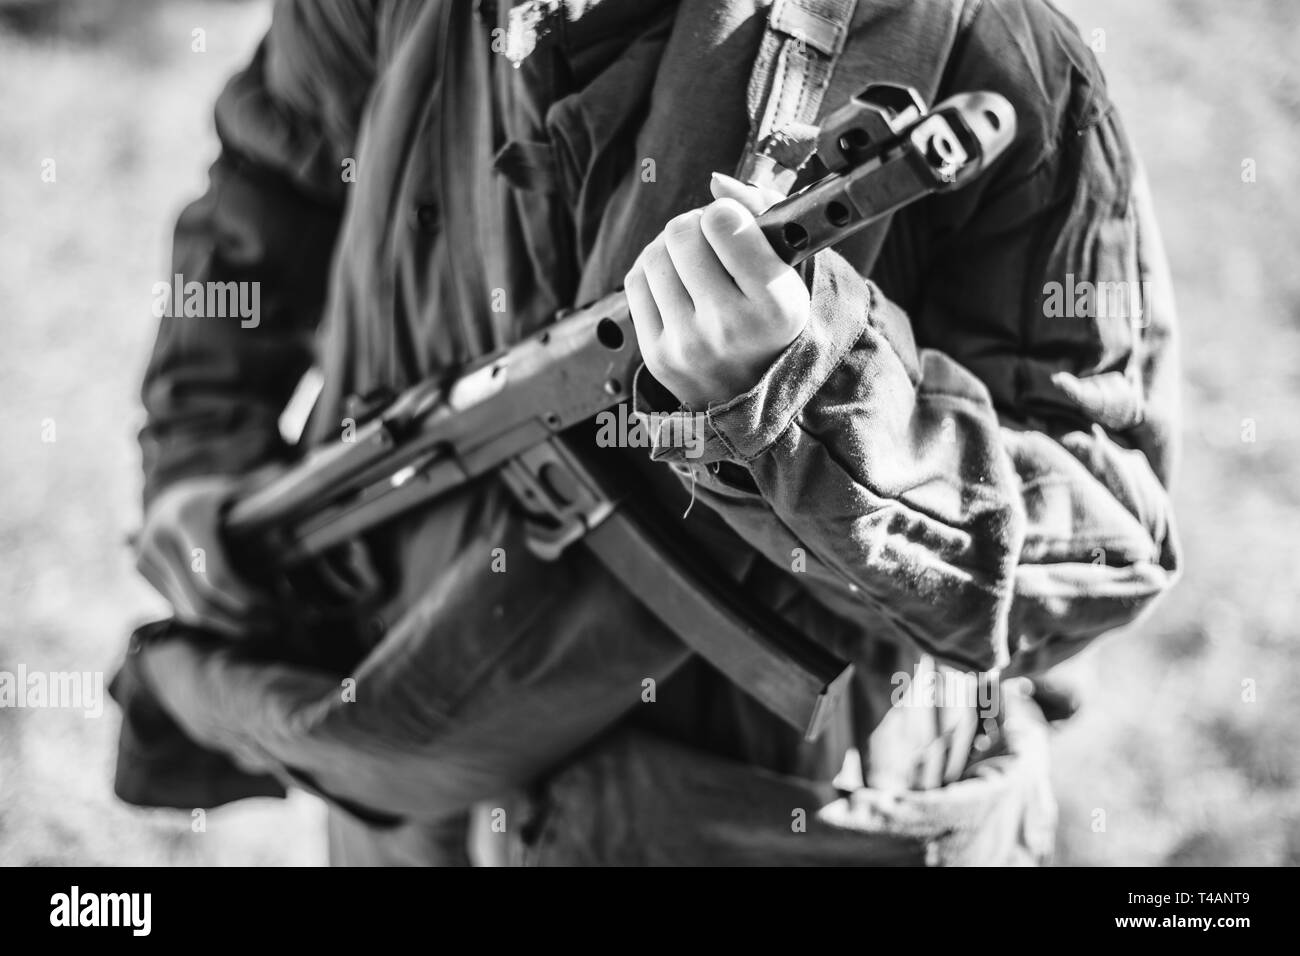 Woman Re-enactor Dressed As World War Ii Soviet Russian Red Army Soldier Holding World War II Weapon Submachine Gun Pps-43. WWII WW2 Russian Ammunitio Stock Photo